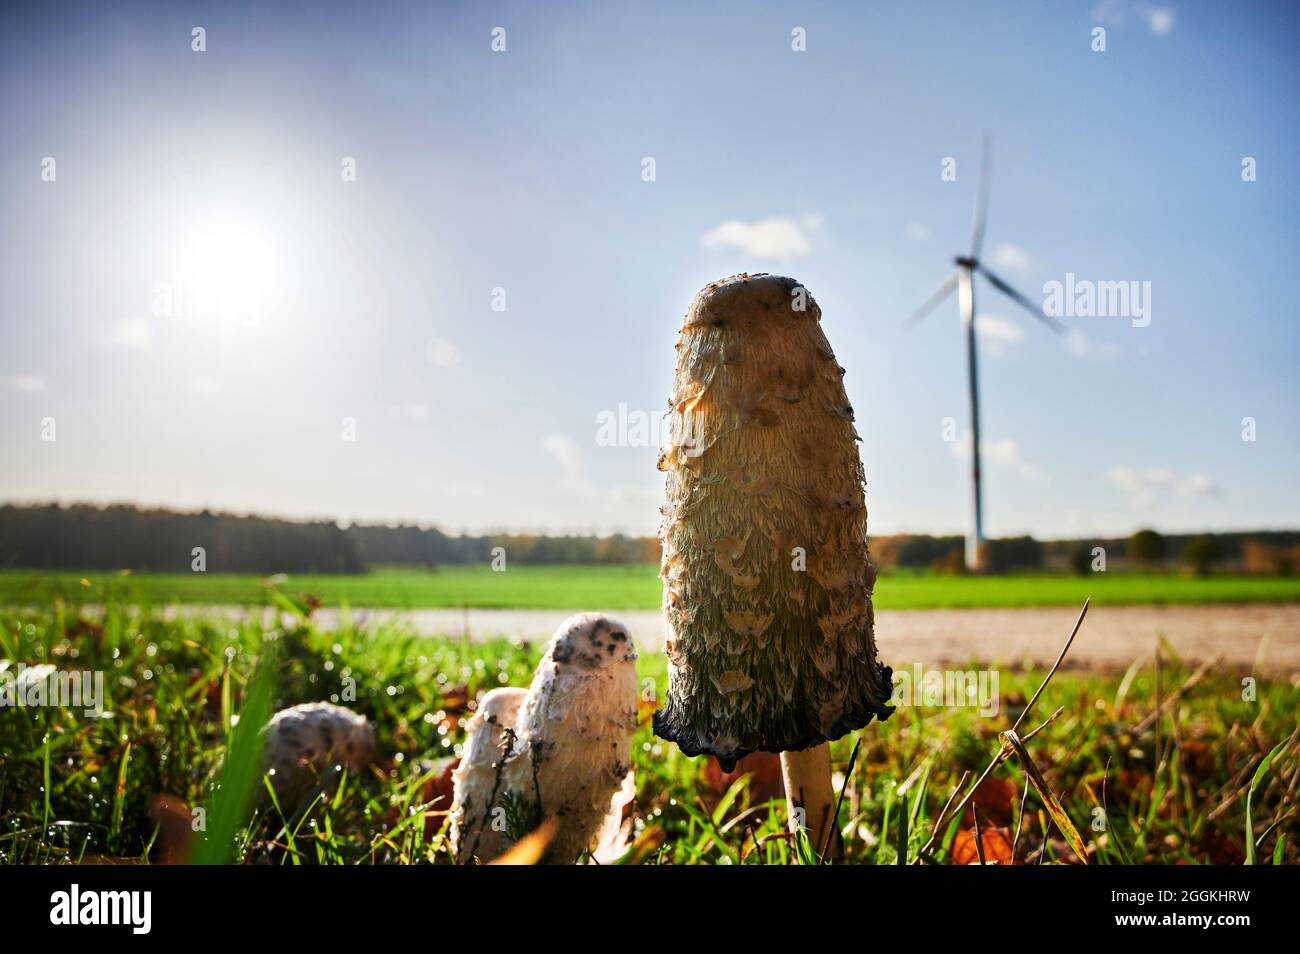 Ecological and close to nature, sustainability, mushrooms on a meadow in front of a wind turbine, sun in the backlight, the mushroom tint has healing properties Stock Photo